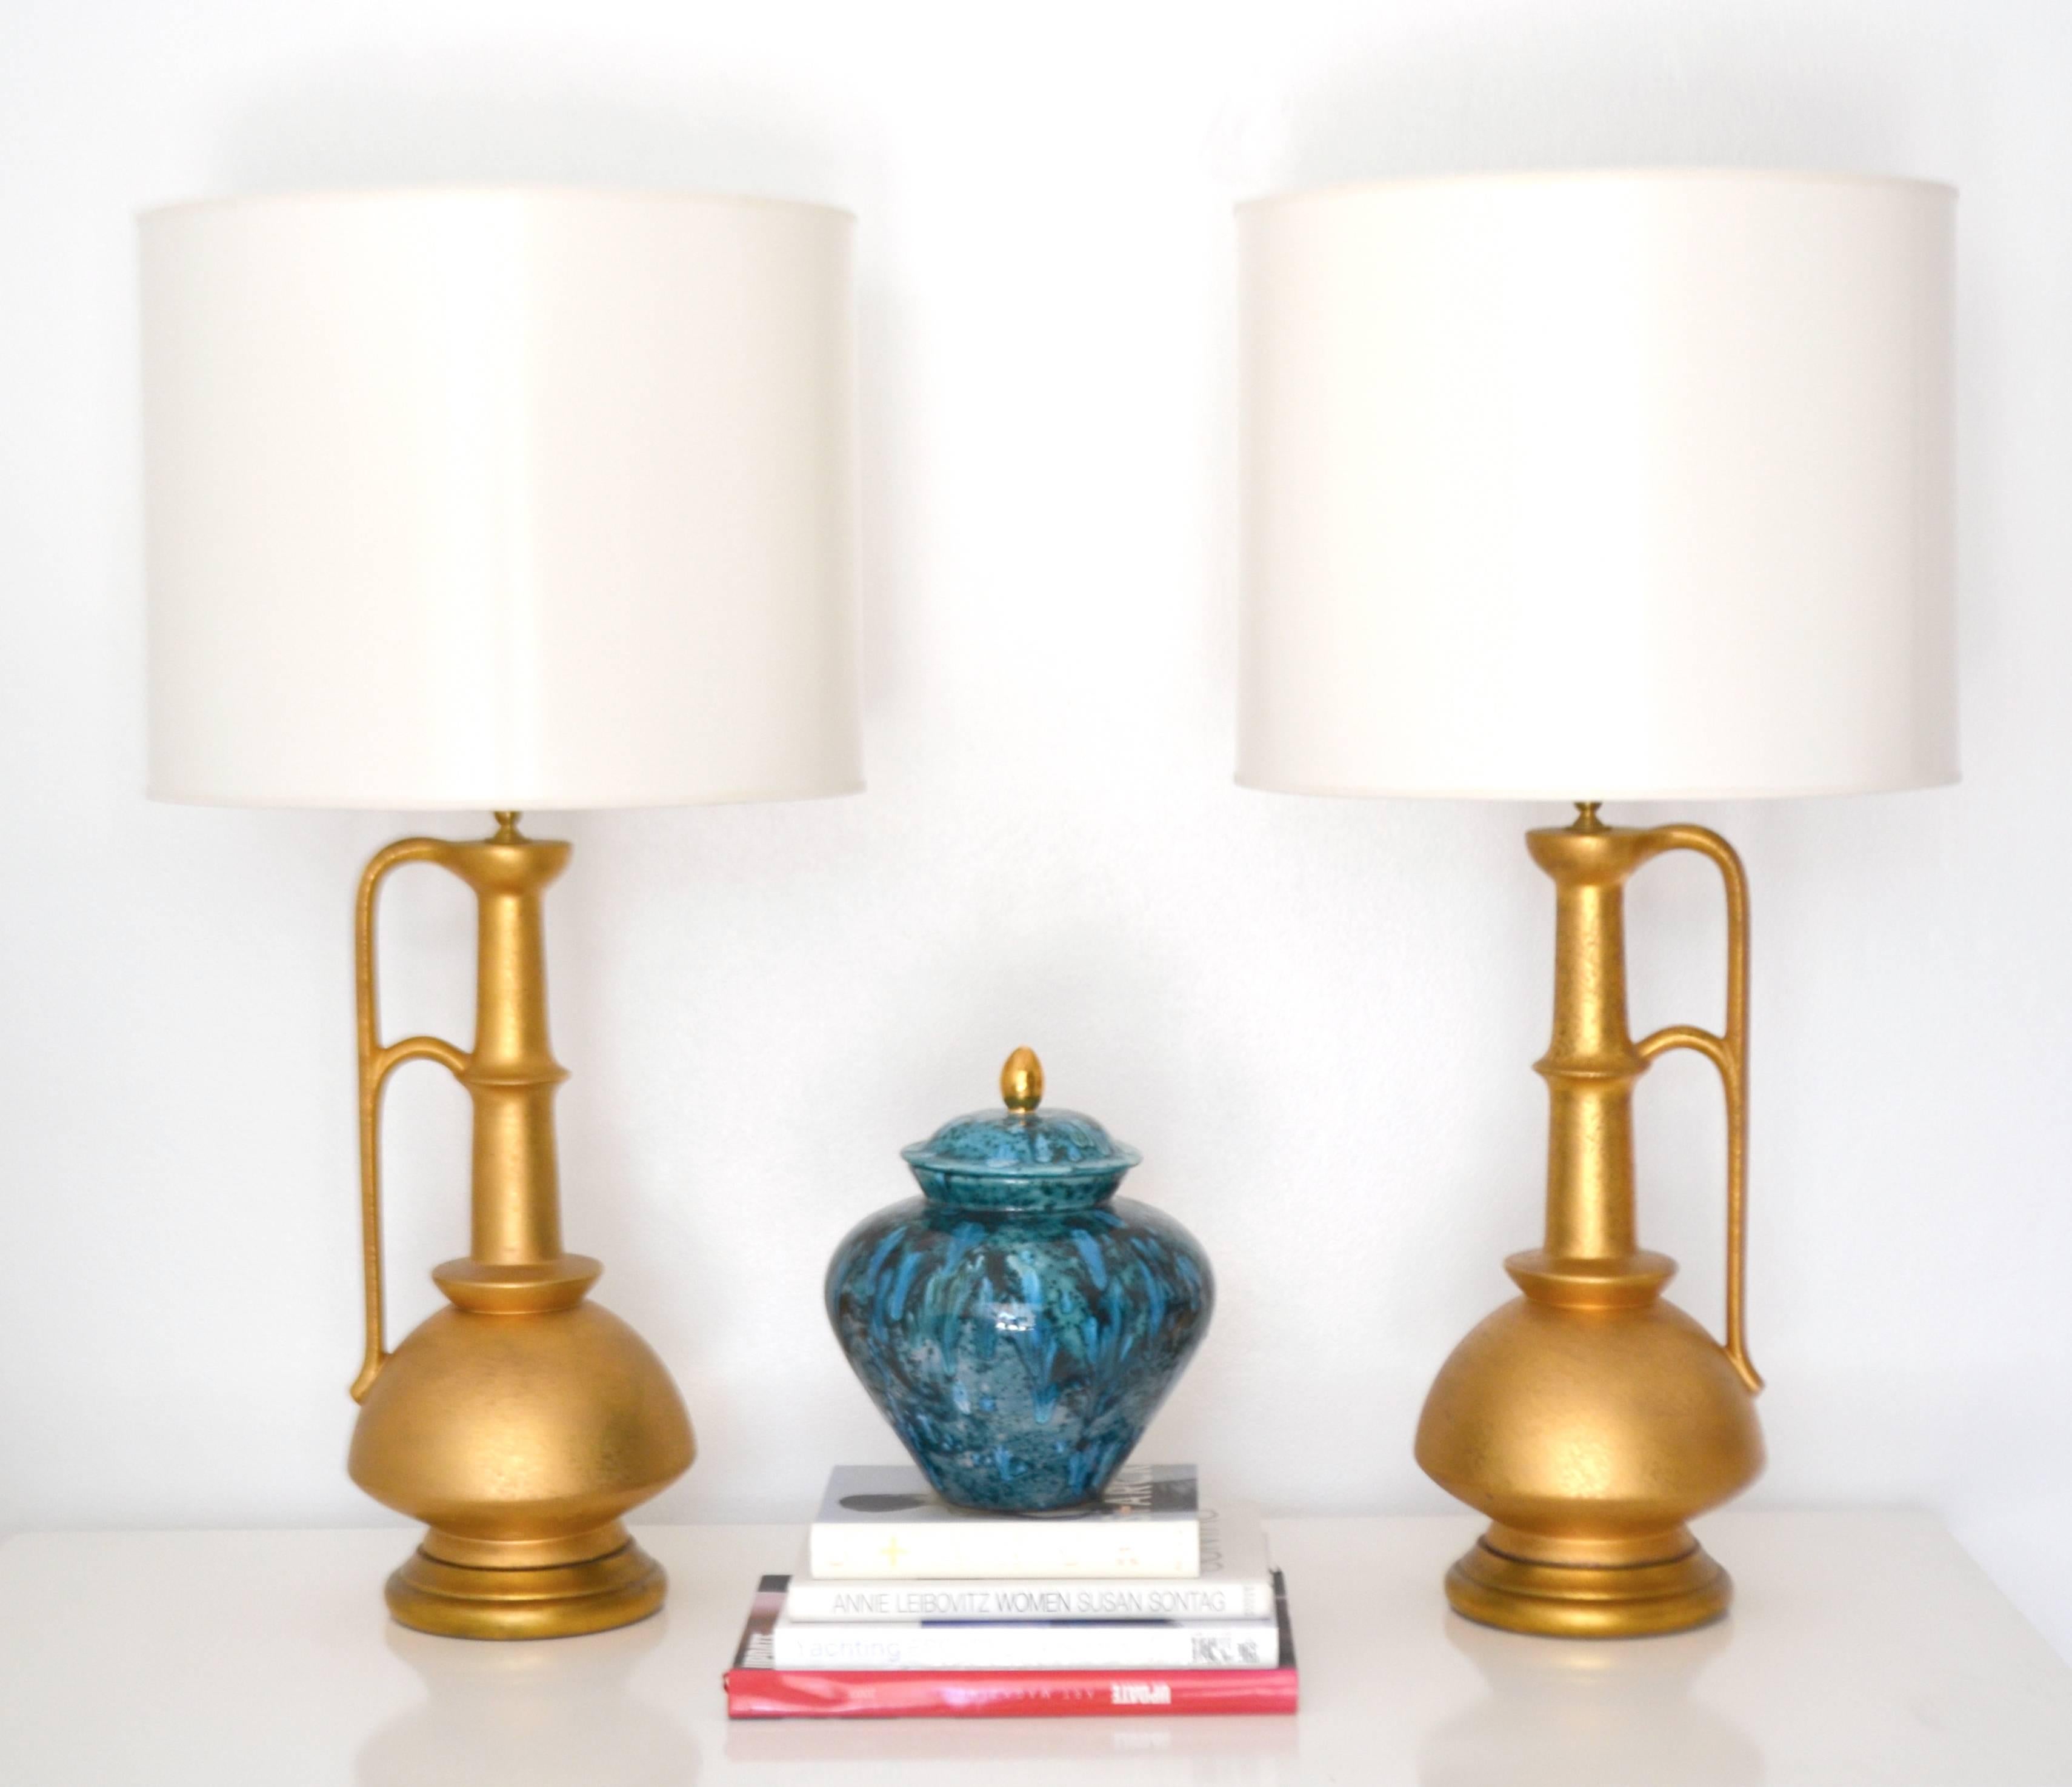 Striking pair of Italian midcentury ceramic jar form table lamps, circa 1950s-1960s. These glamorous highly decorative gilt glazed lamps are mounted on carved giltwood bases and wired with brass fittings and silk cords. Shades not